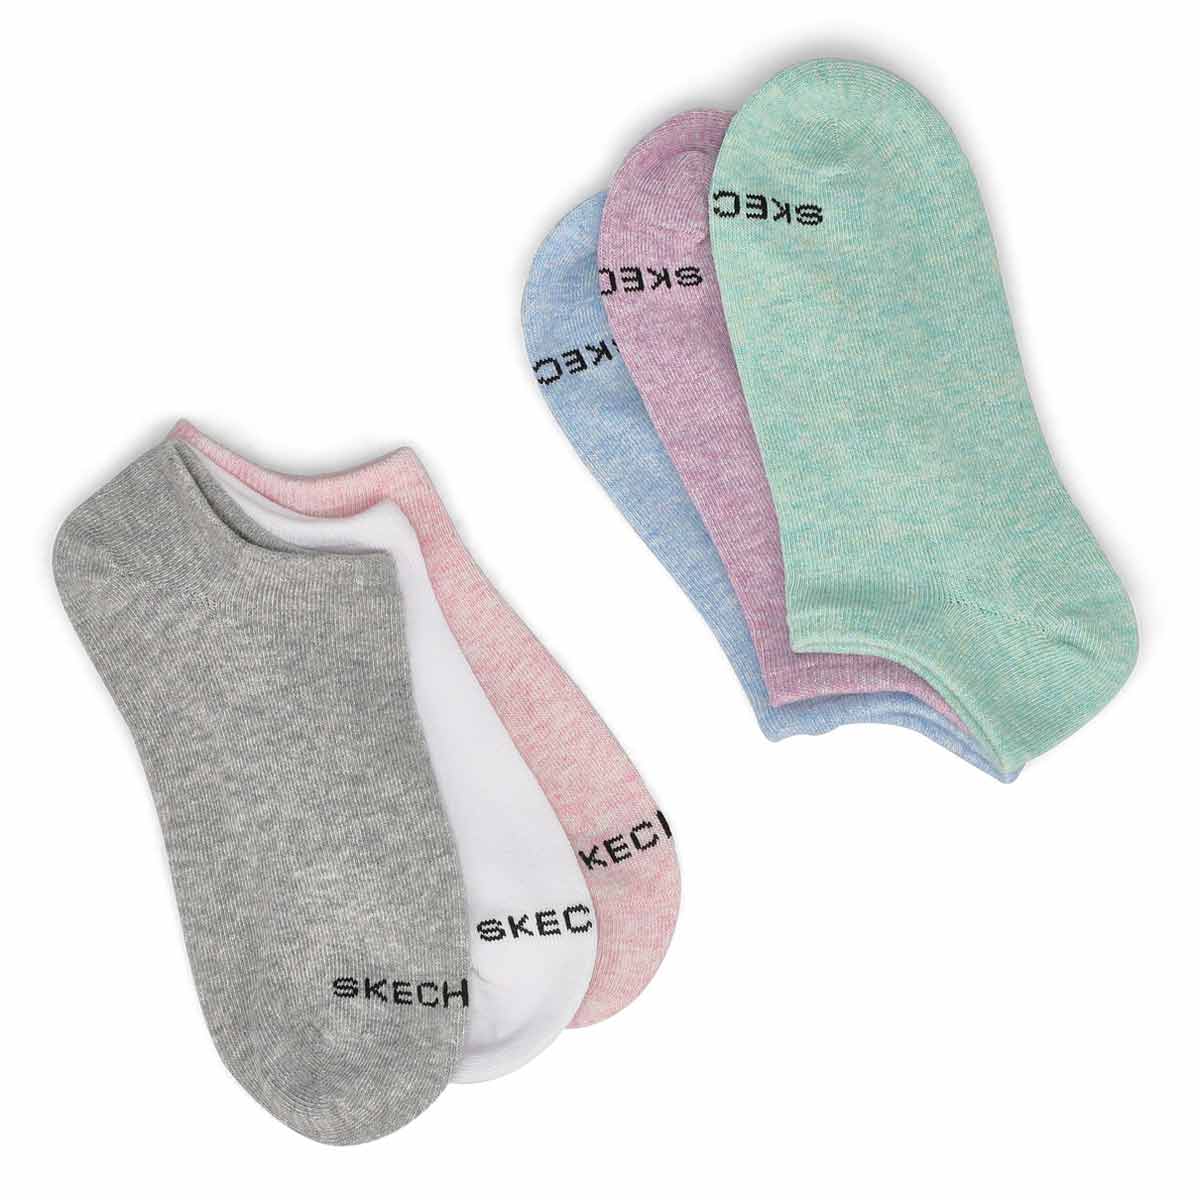 Womens No Show Non Terry Sock 6 Pack - Multi